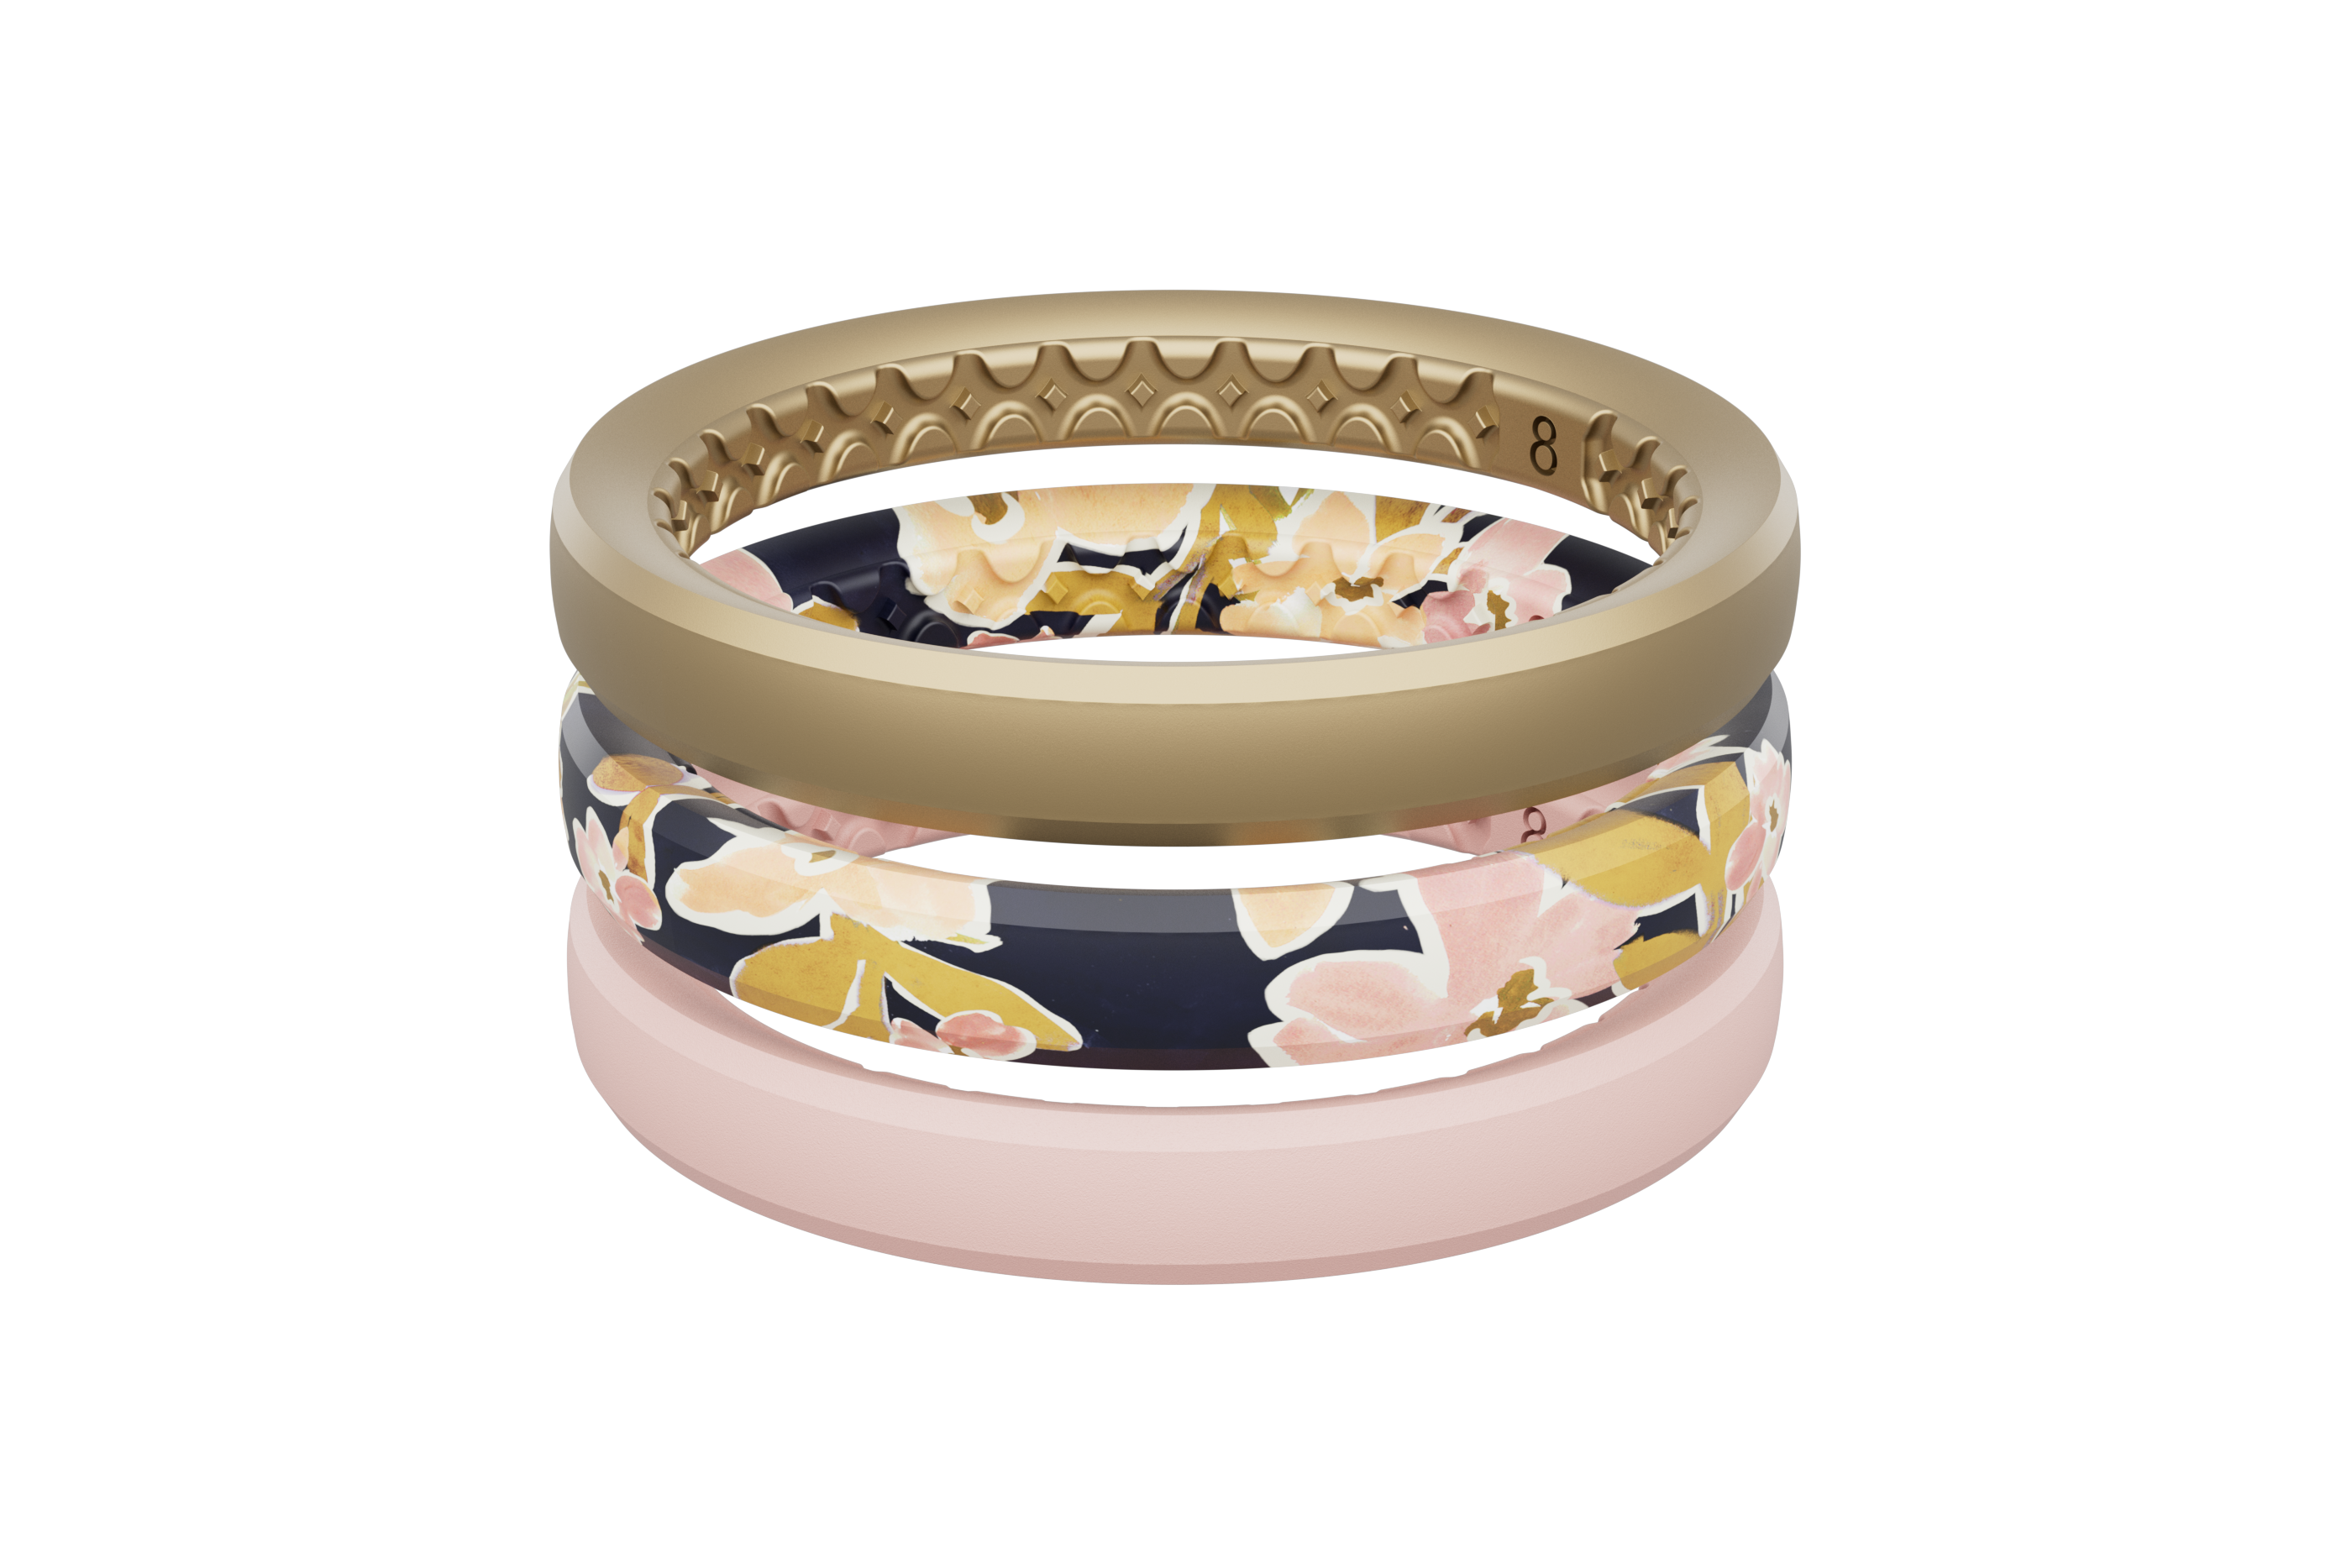 This stackable Louis Vuitton ring in white, yellow and pink